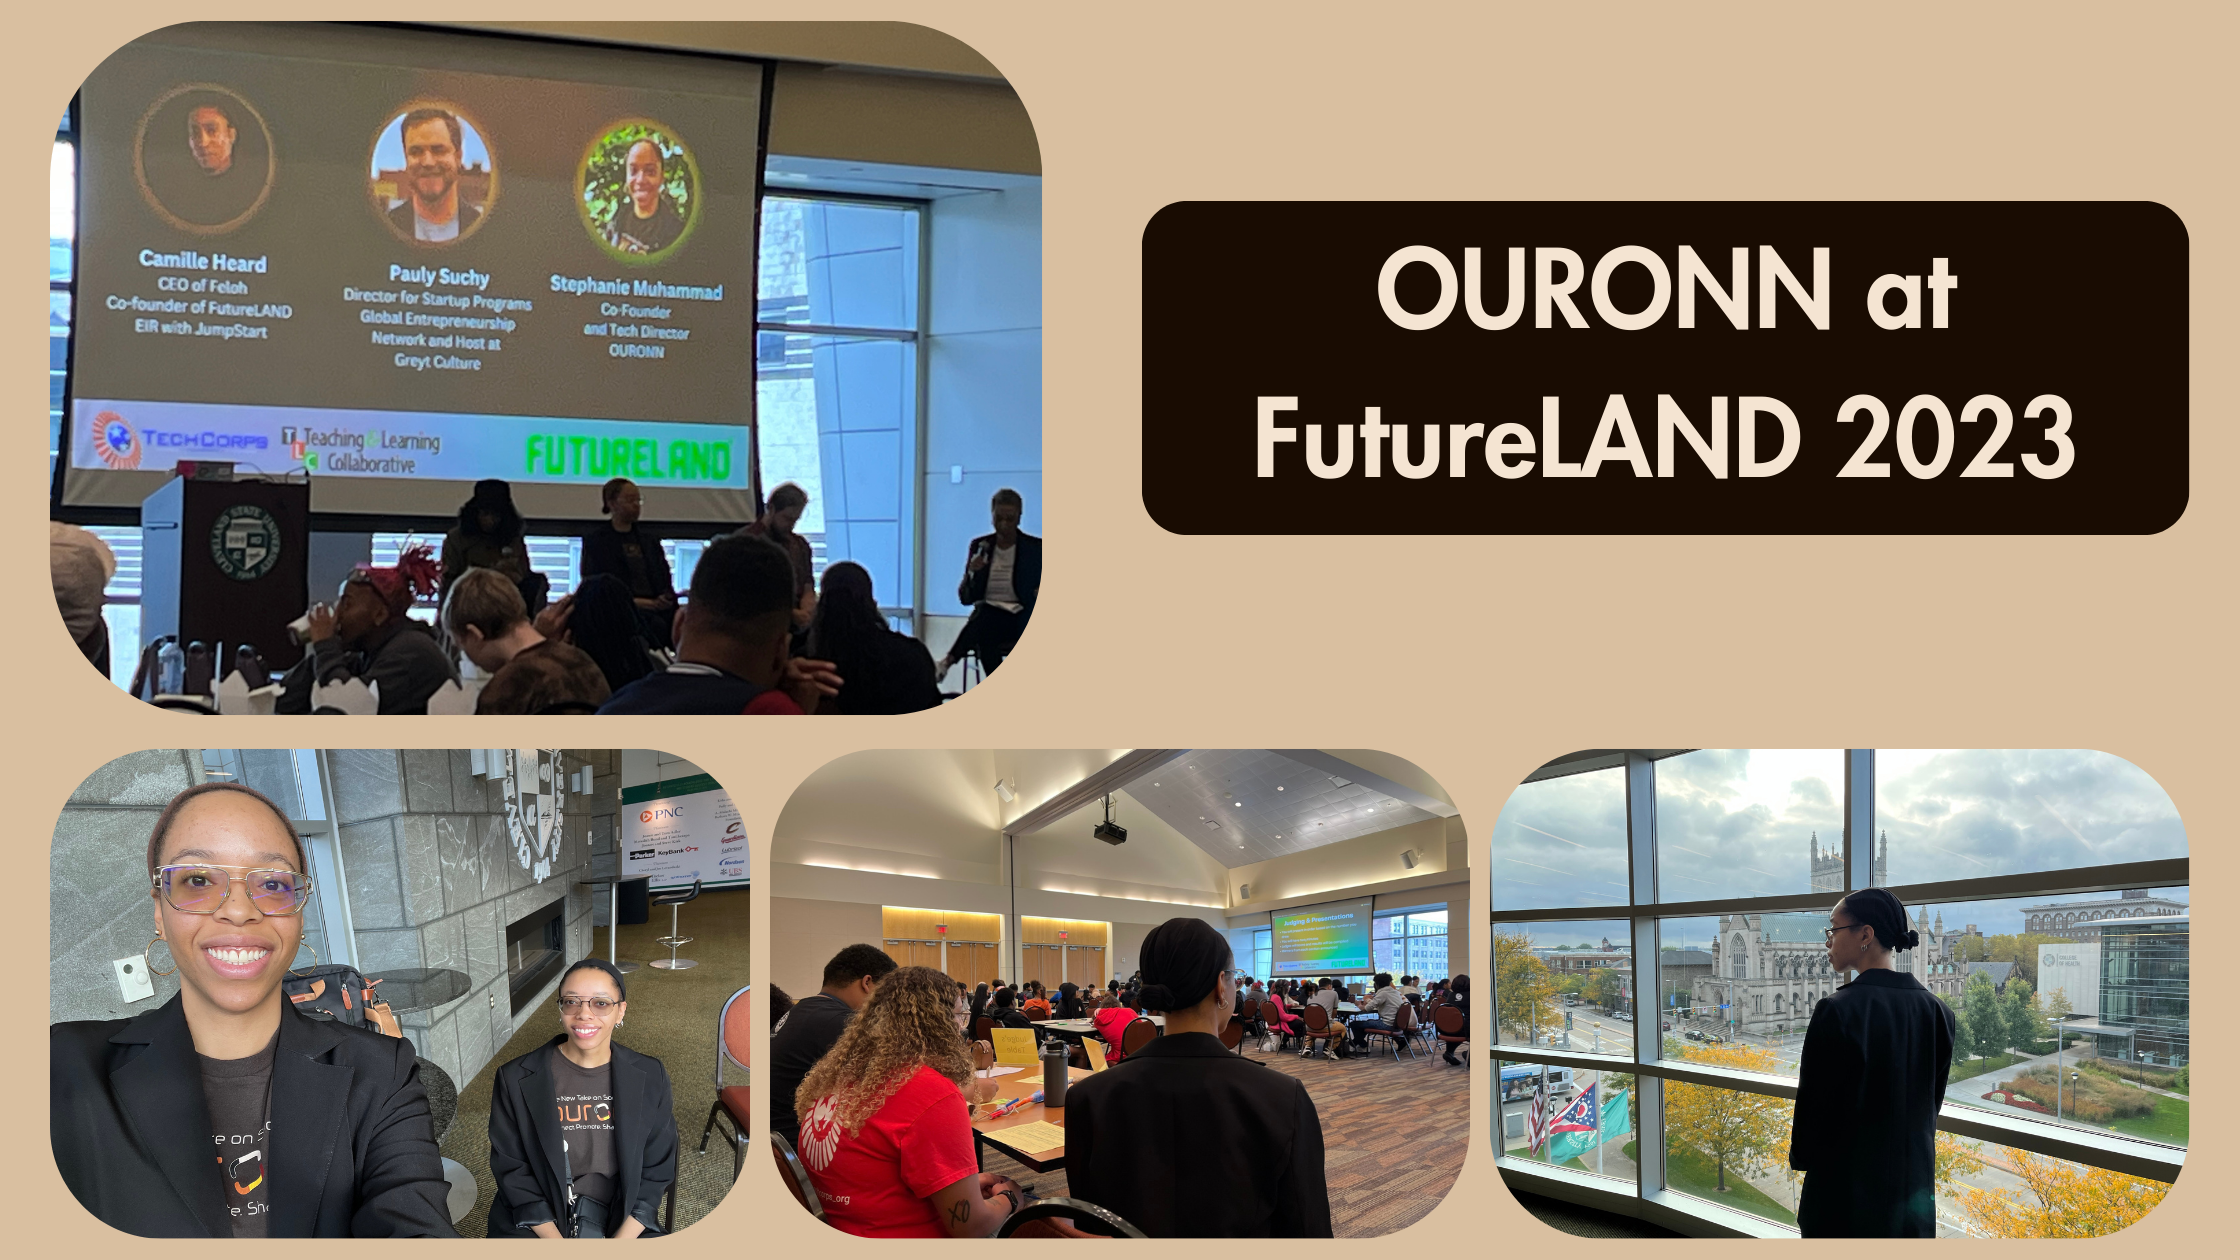 "OURONN at FutureLAND 2023" Cover Image